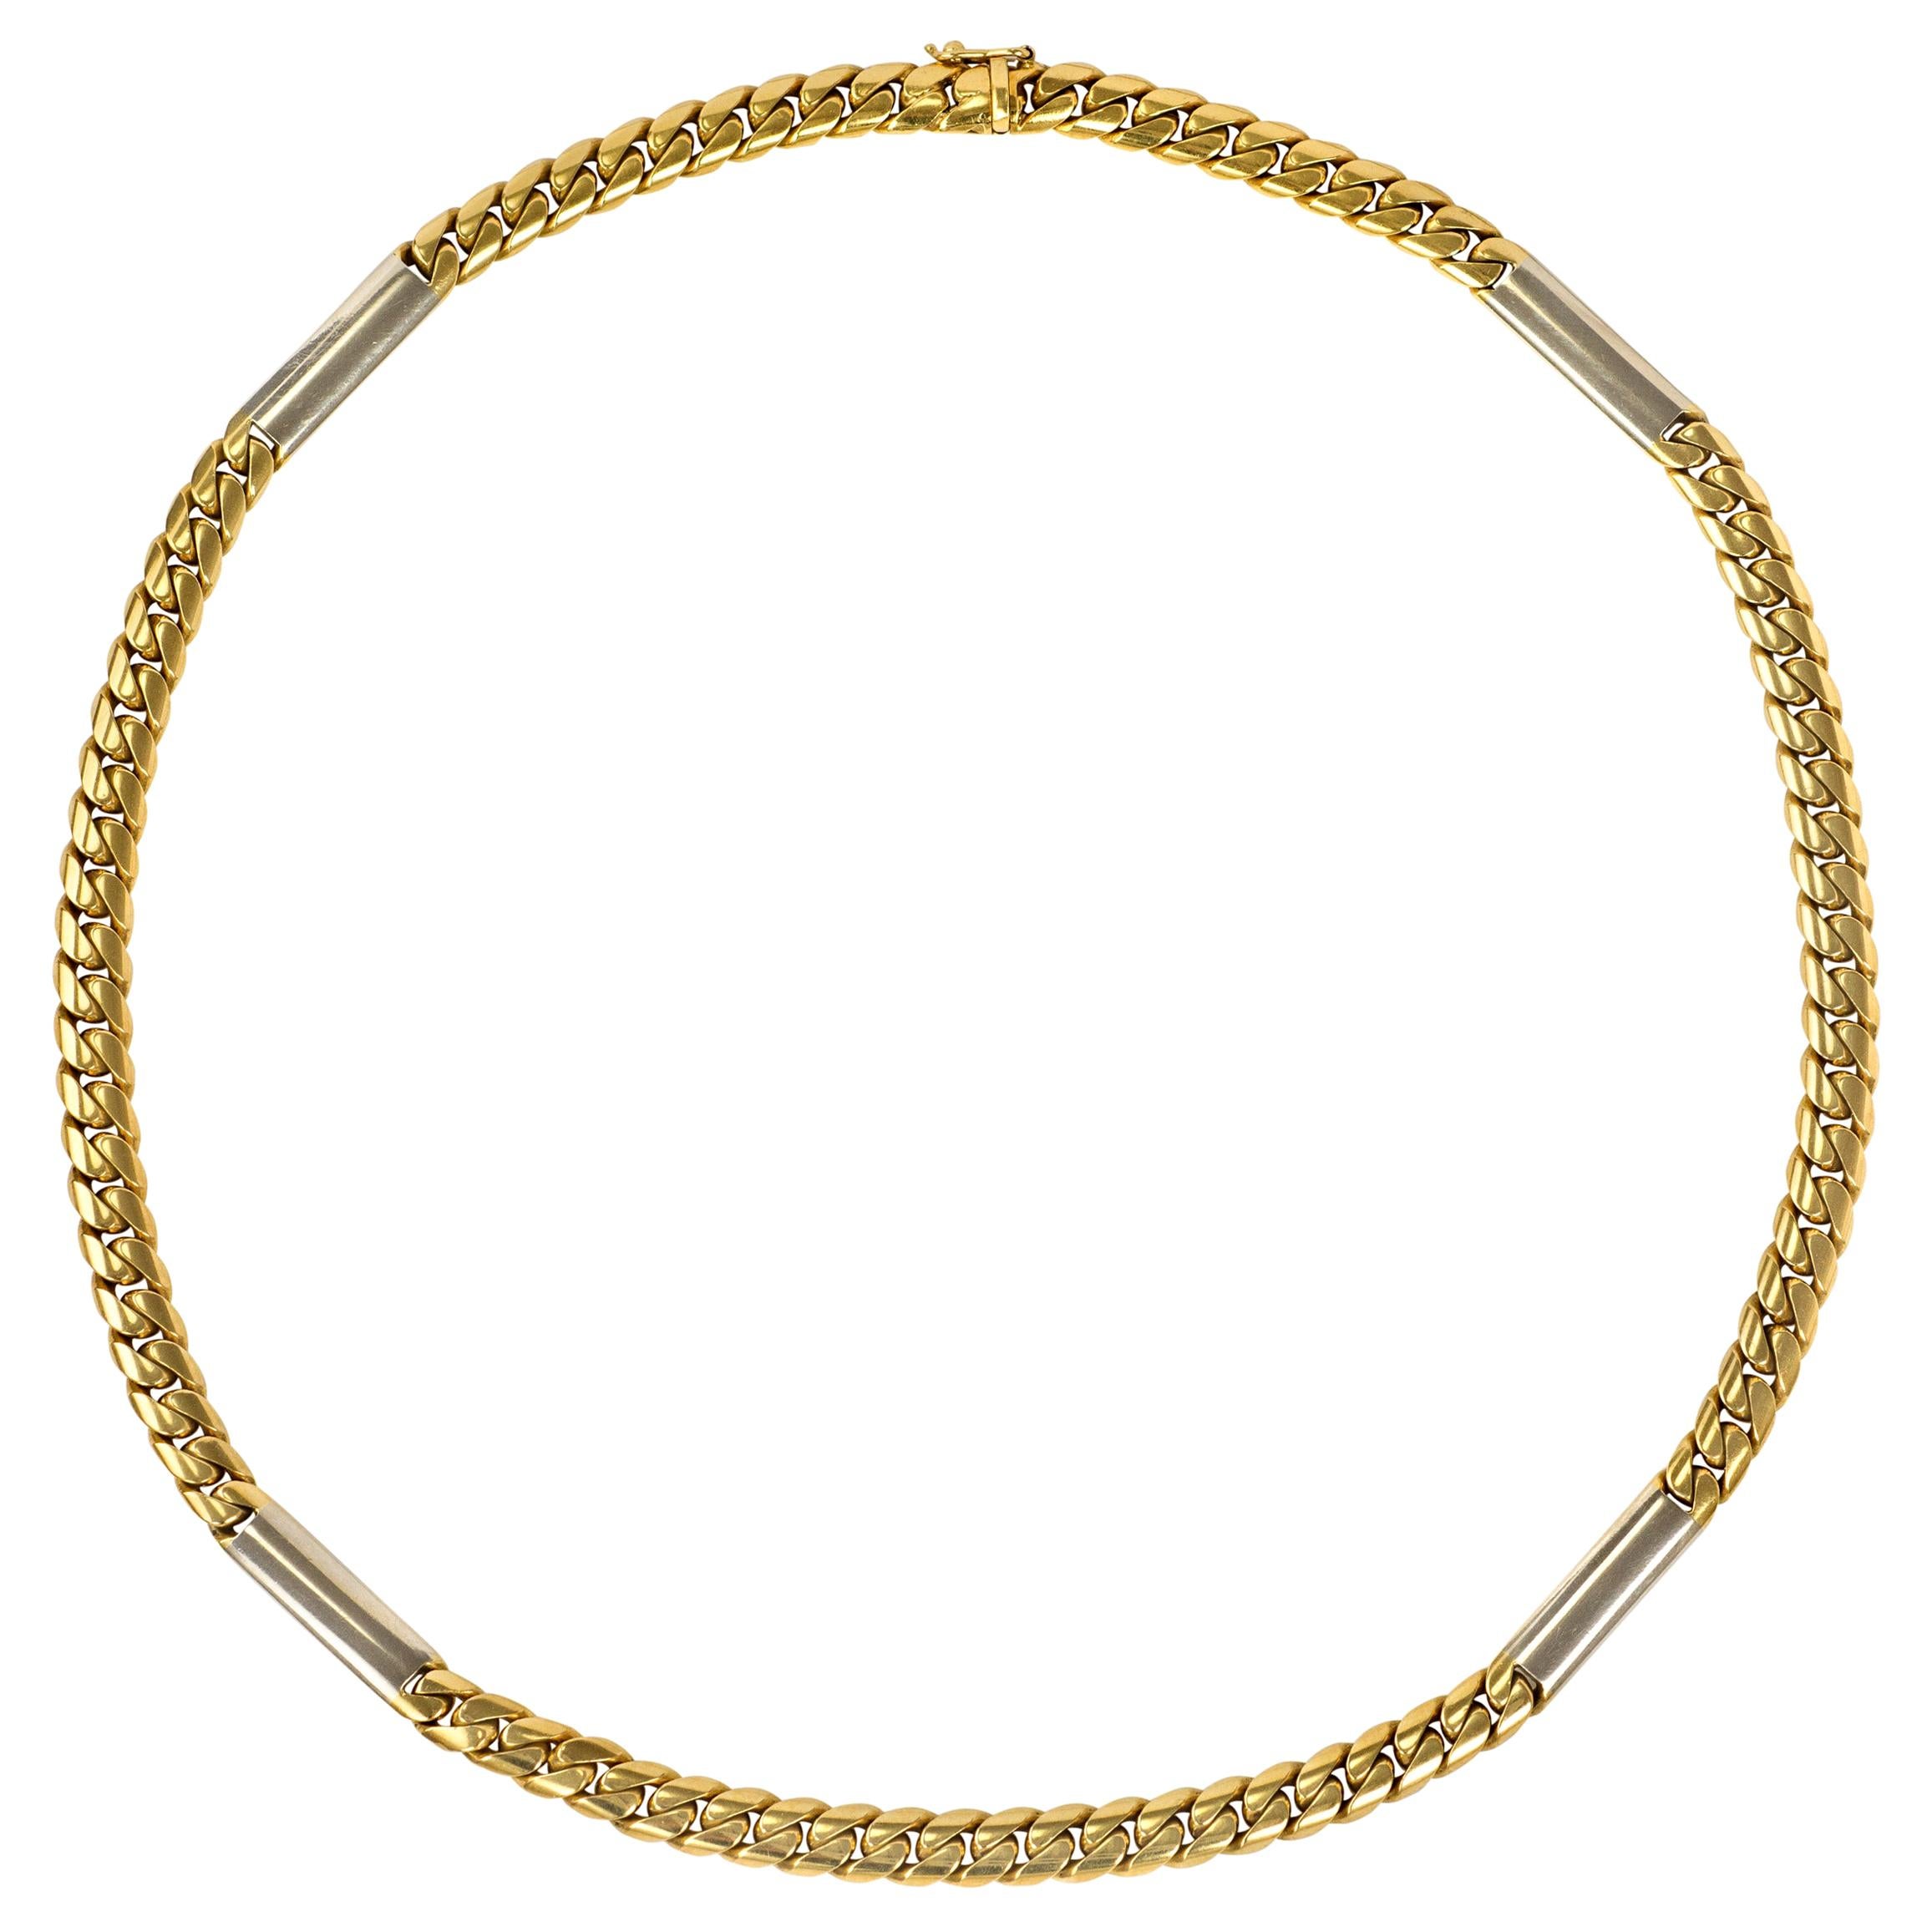 Cartier Yellow and White Gold Curb Link Chain